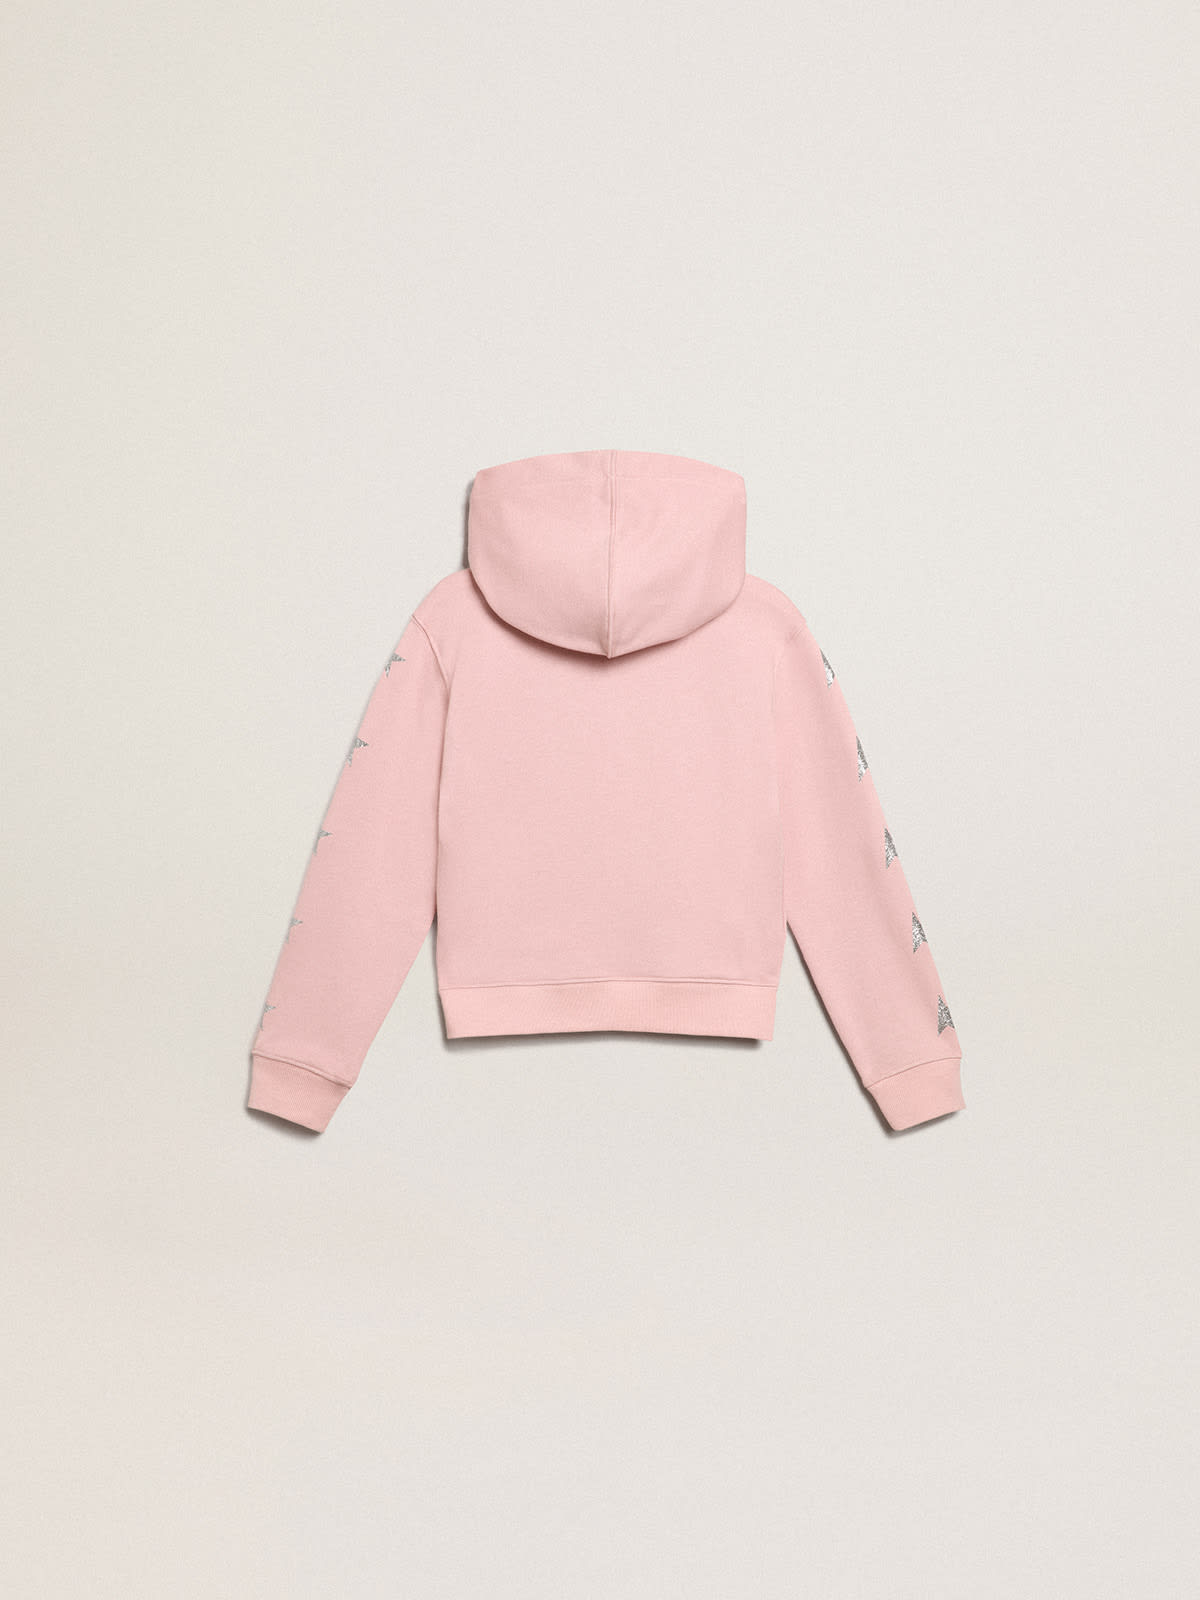 Golden Goose - Pink sweatshirt with hood and silver glitter stars in 